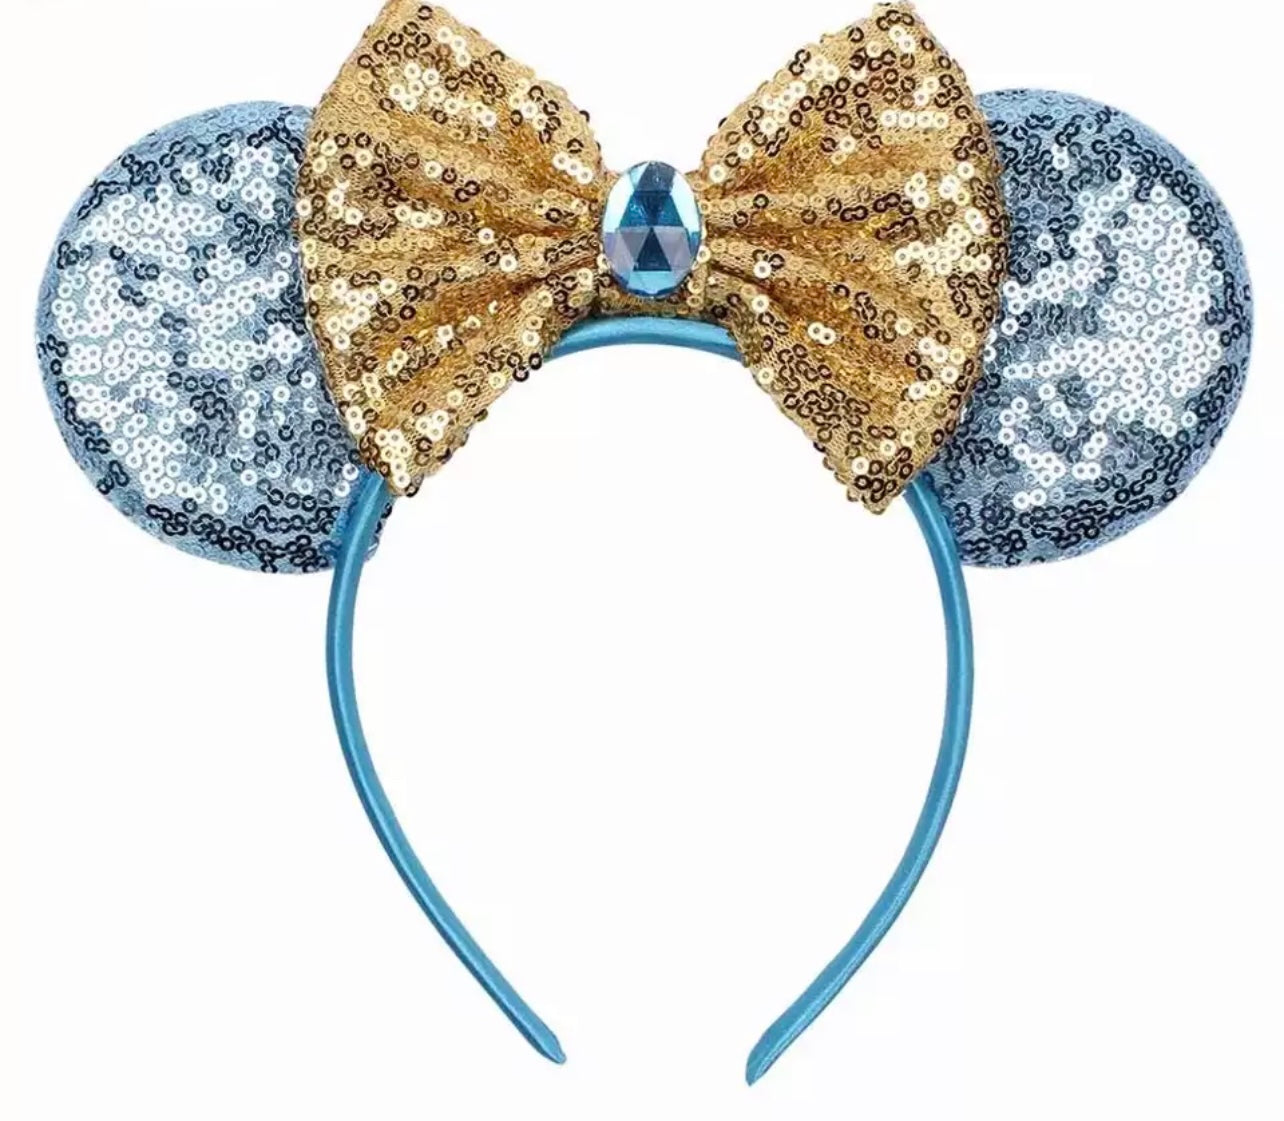 Mouse ears on plastic band